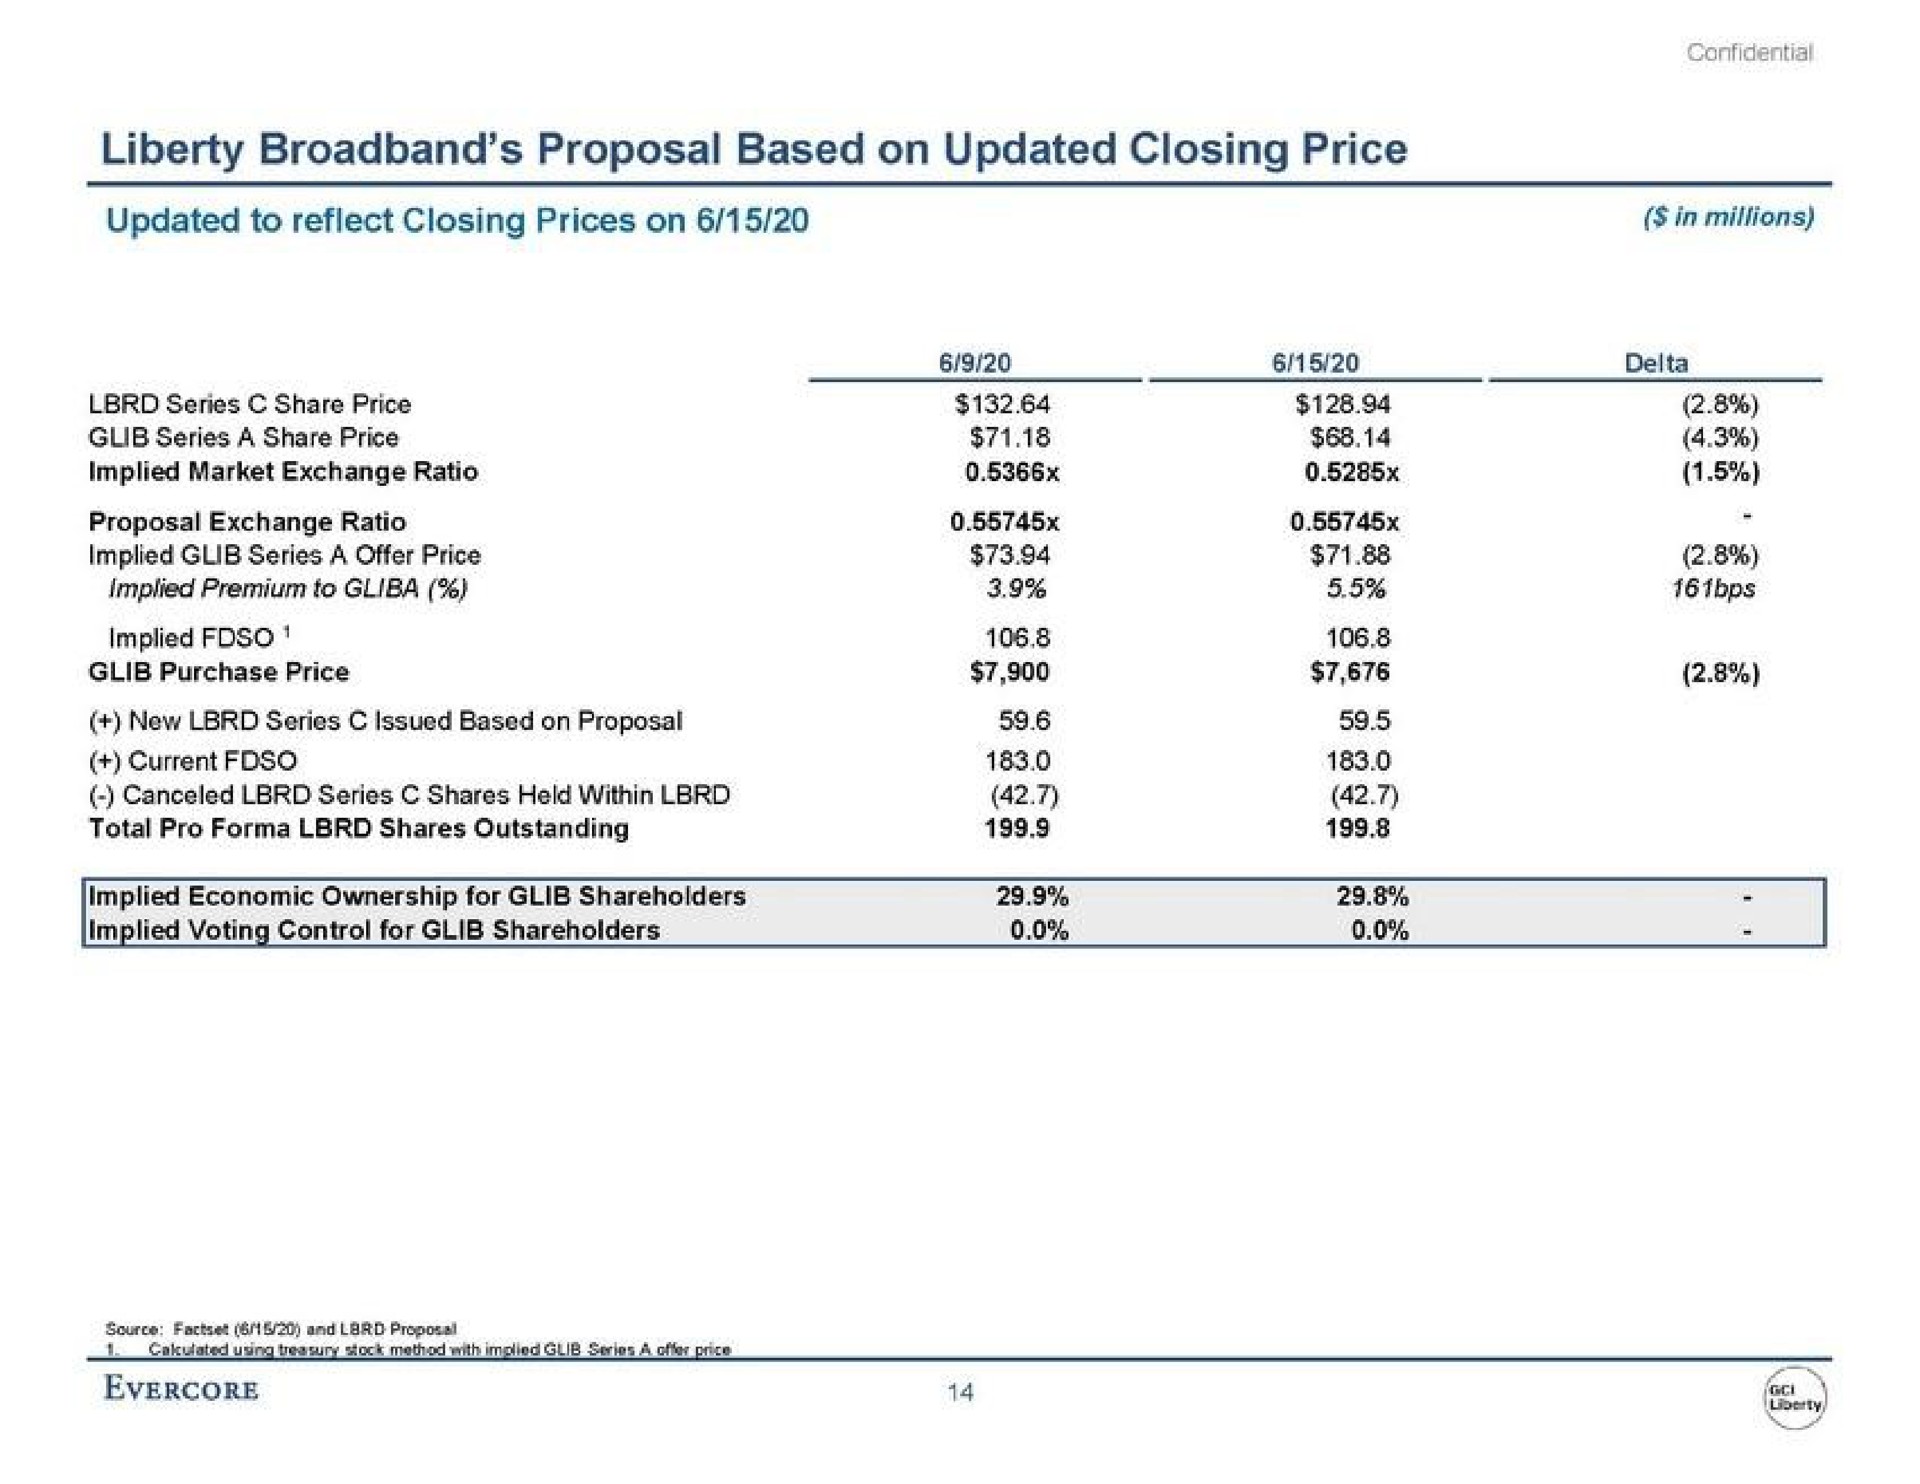 liberty proposal based on updated closing price updated to reflect closing prices on delta | Evercore